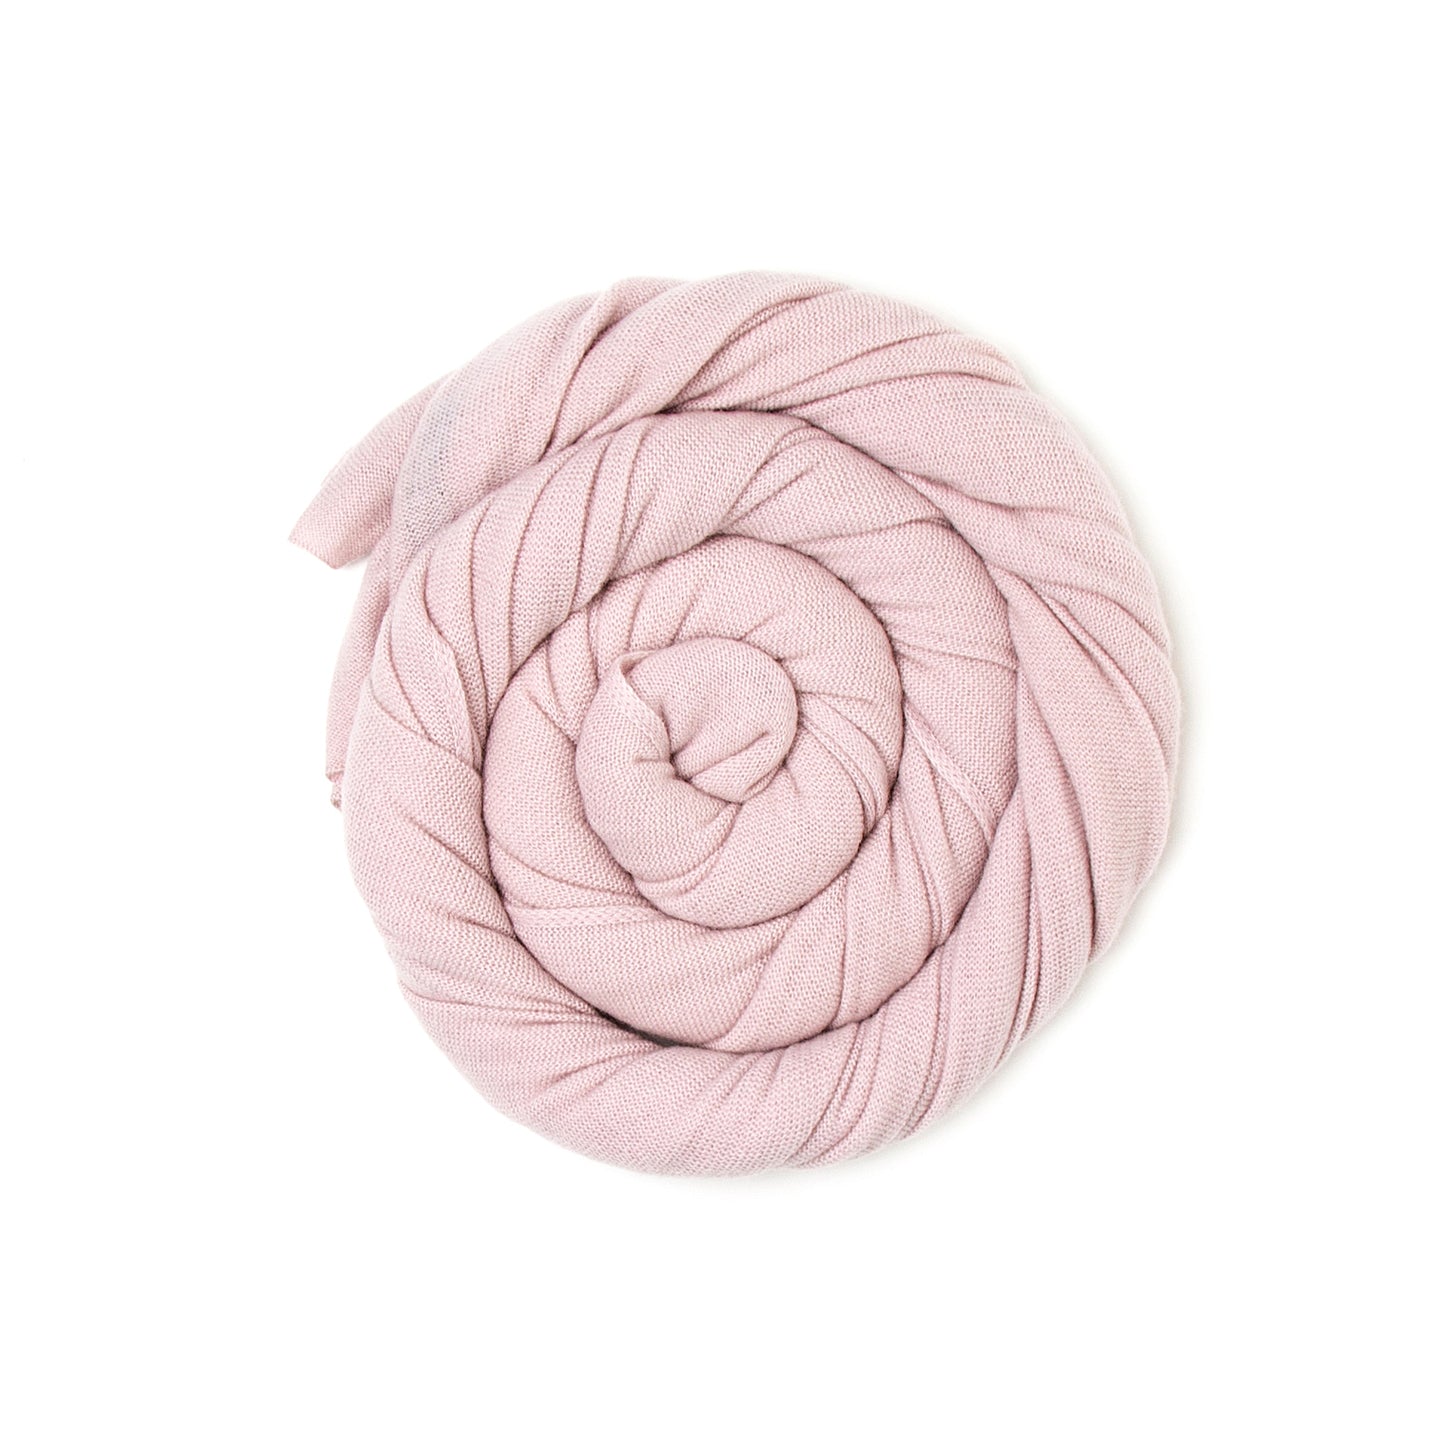 Simply Pink Pure Cashmere Scarf